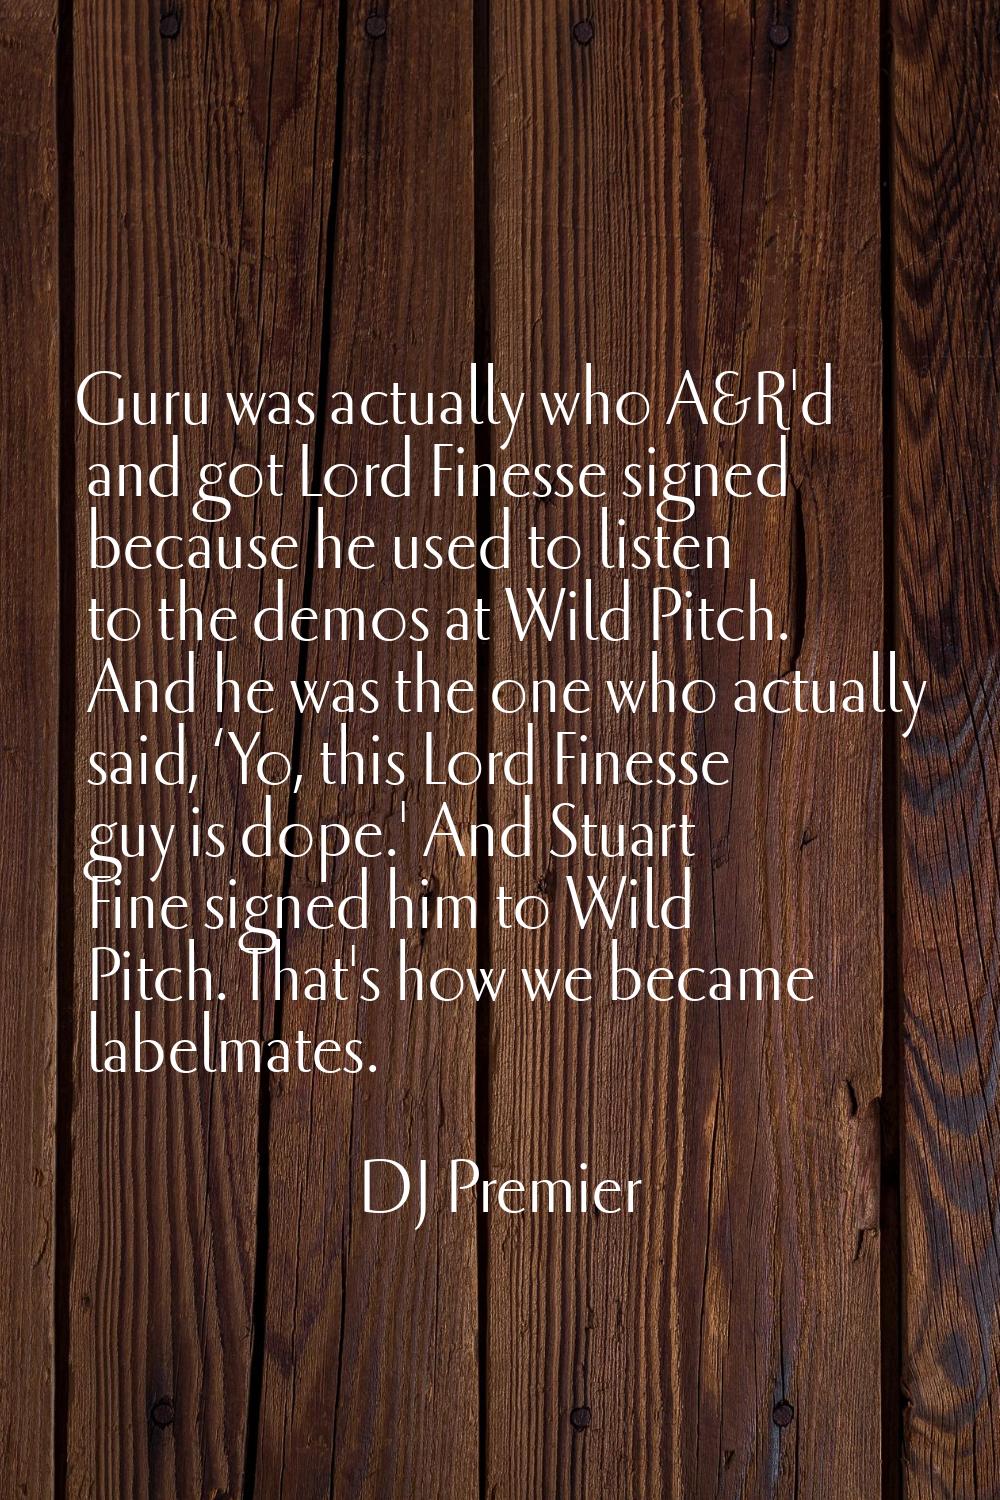 Guru was actually who A&R'd and got Lord Finesse signed because he used to listen to the demos at W